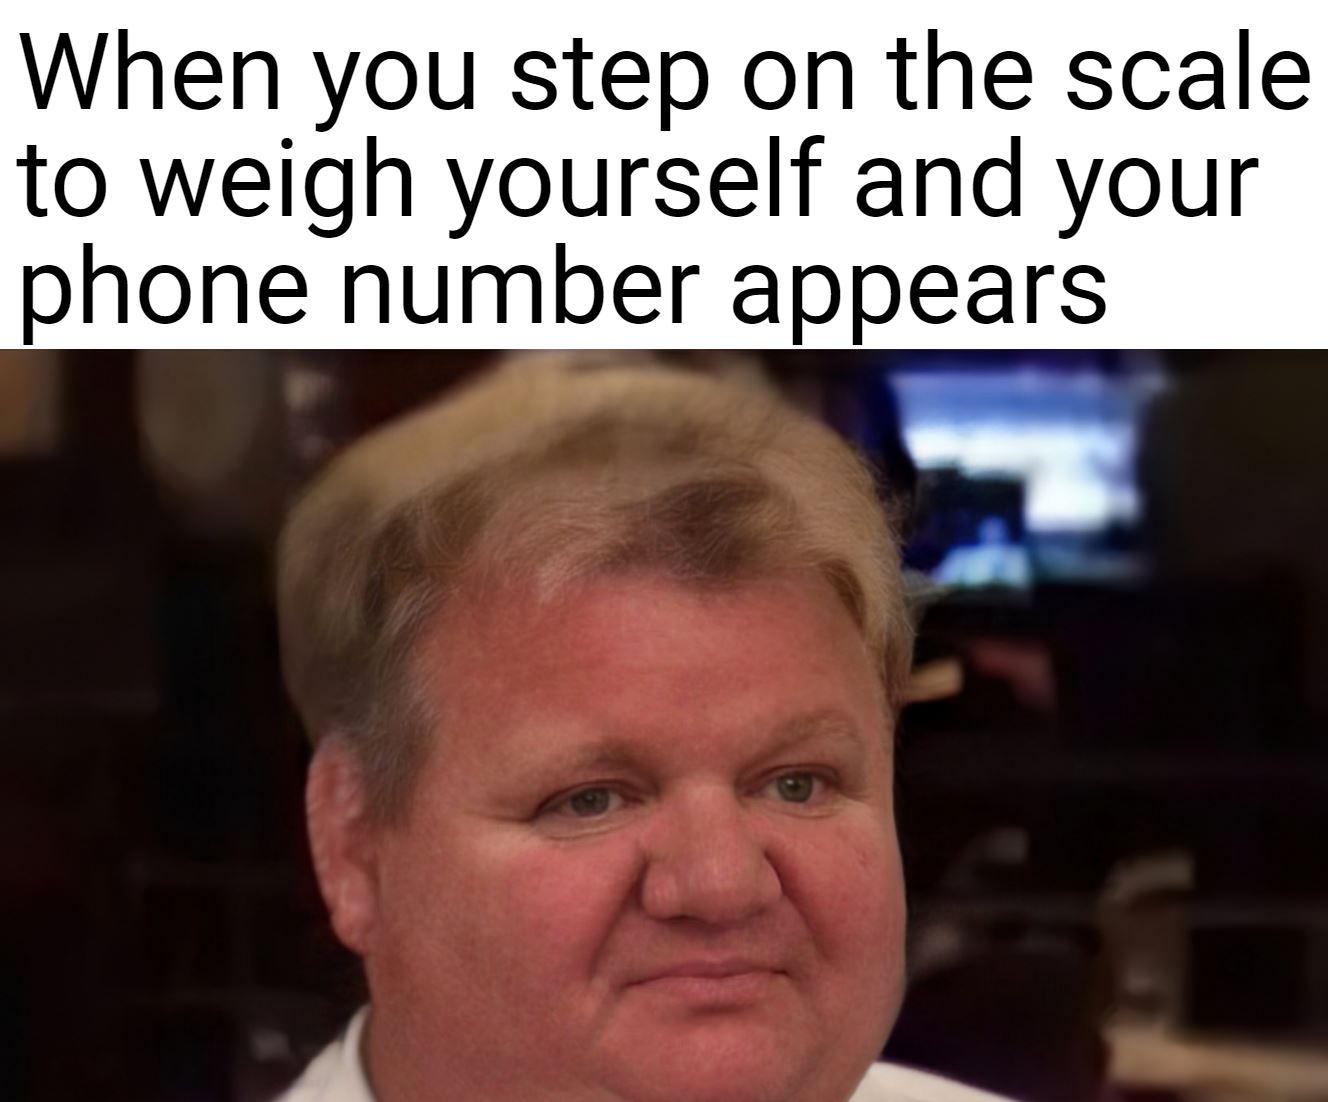 dank memes - funny memes - cod meme 2021 - When you step on the scale to weigh yourself and your phone number appears